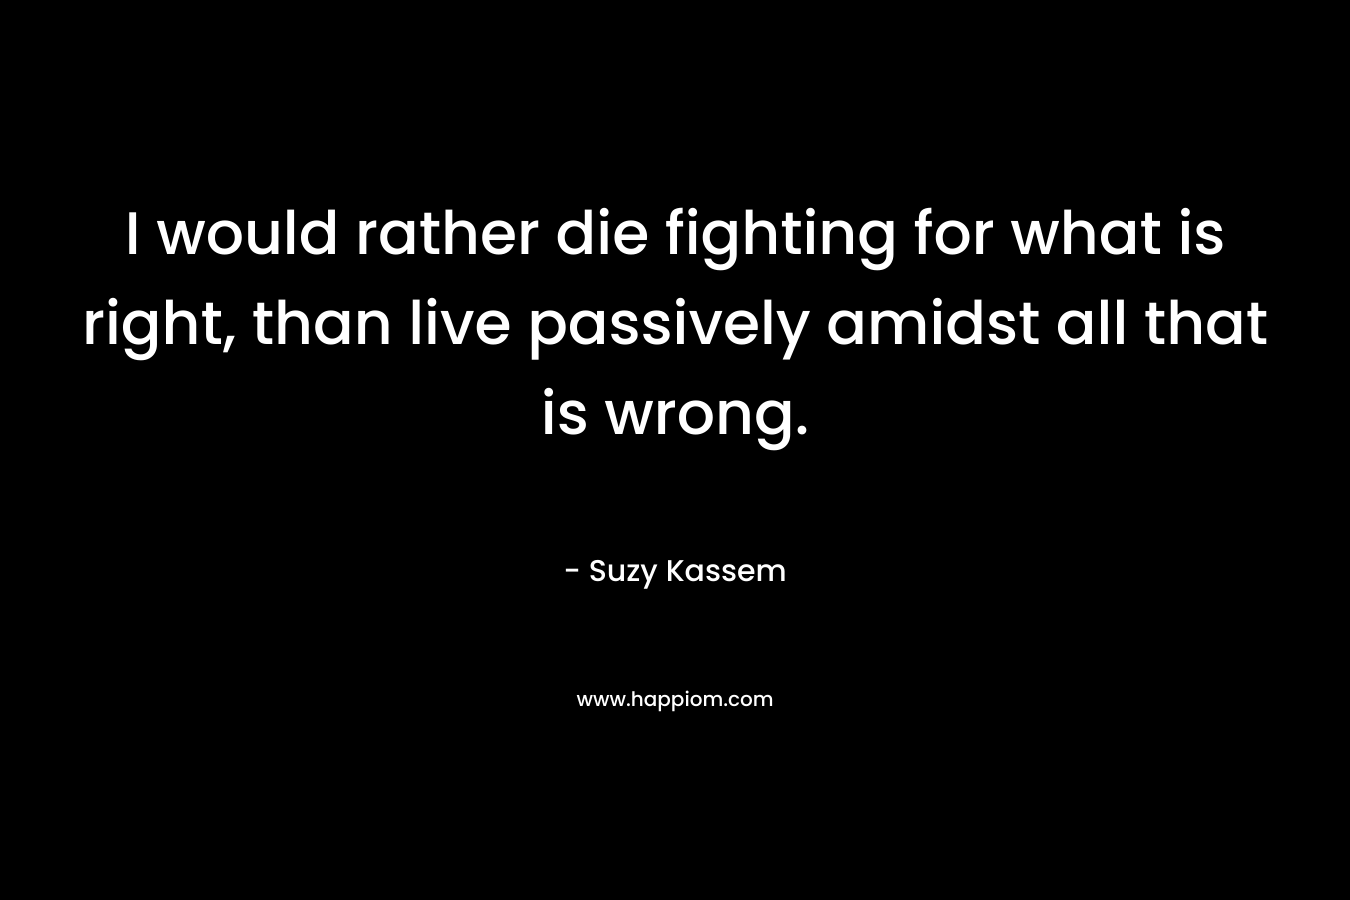 I would rather die fighting for what is right, than live passively amidst all that is wrong. – Suzy Kassem